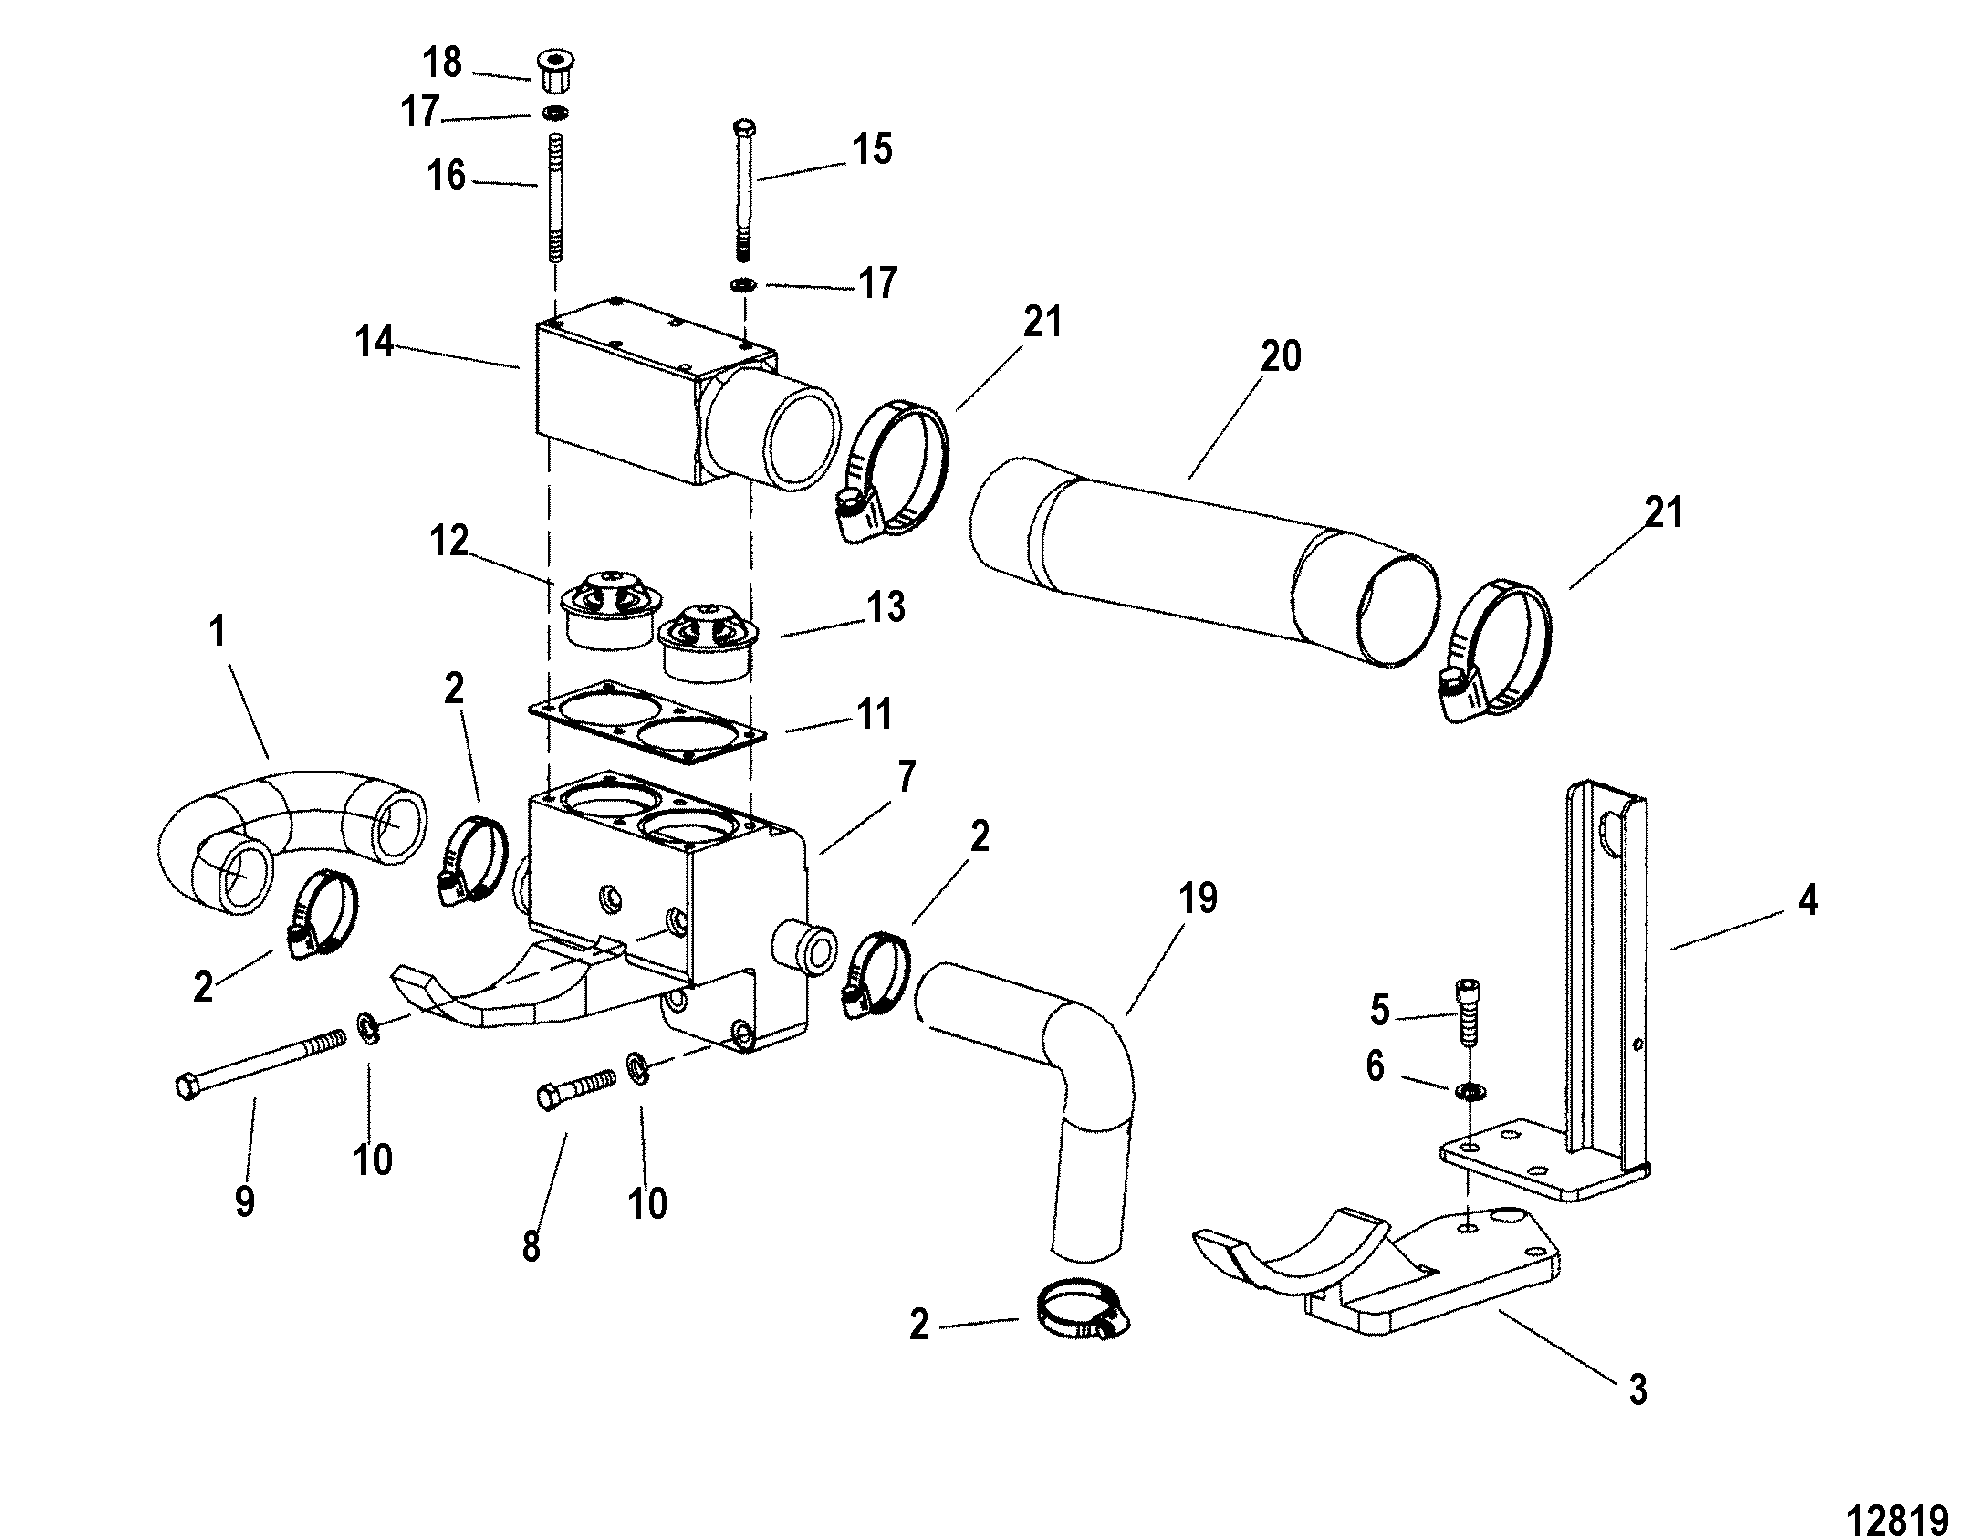 THERMOSTAT ASSEMBLY AND HOSES